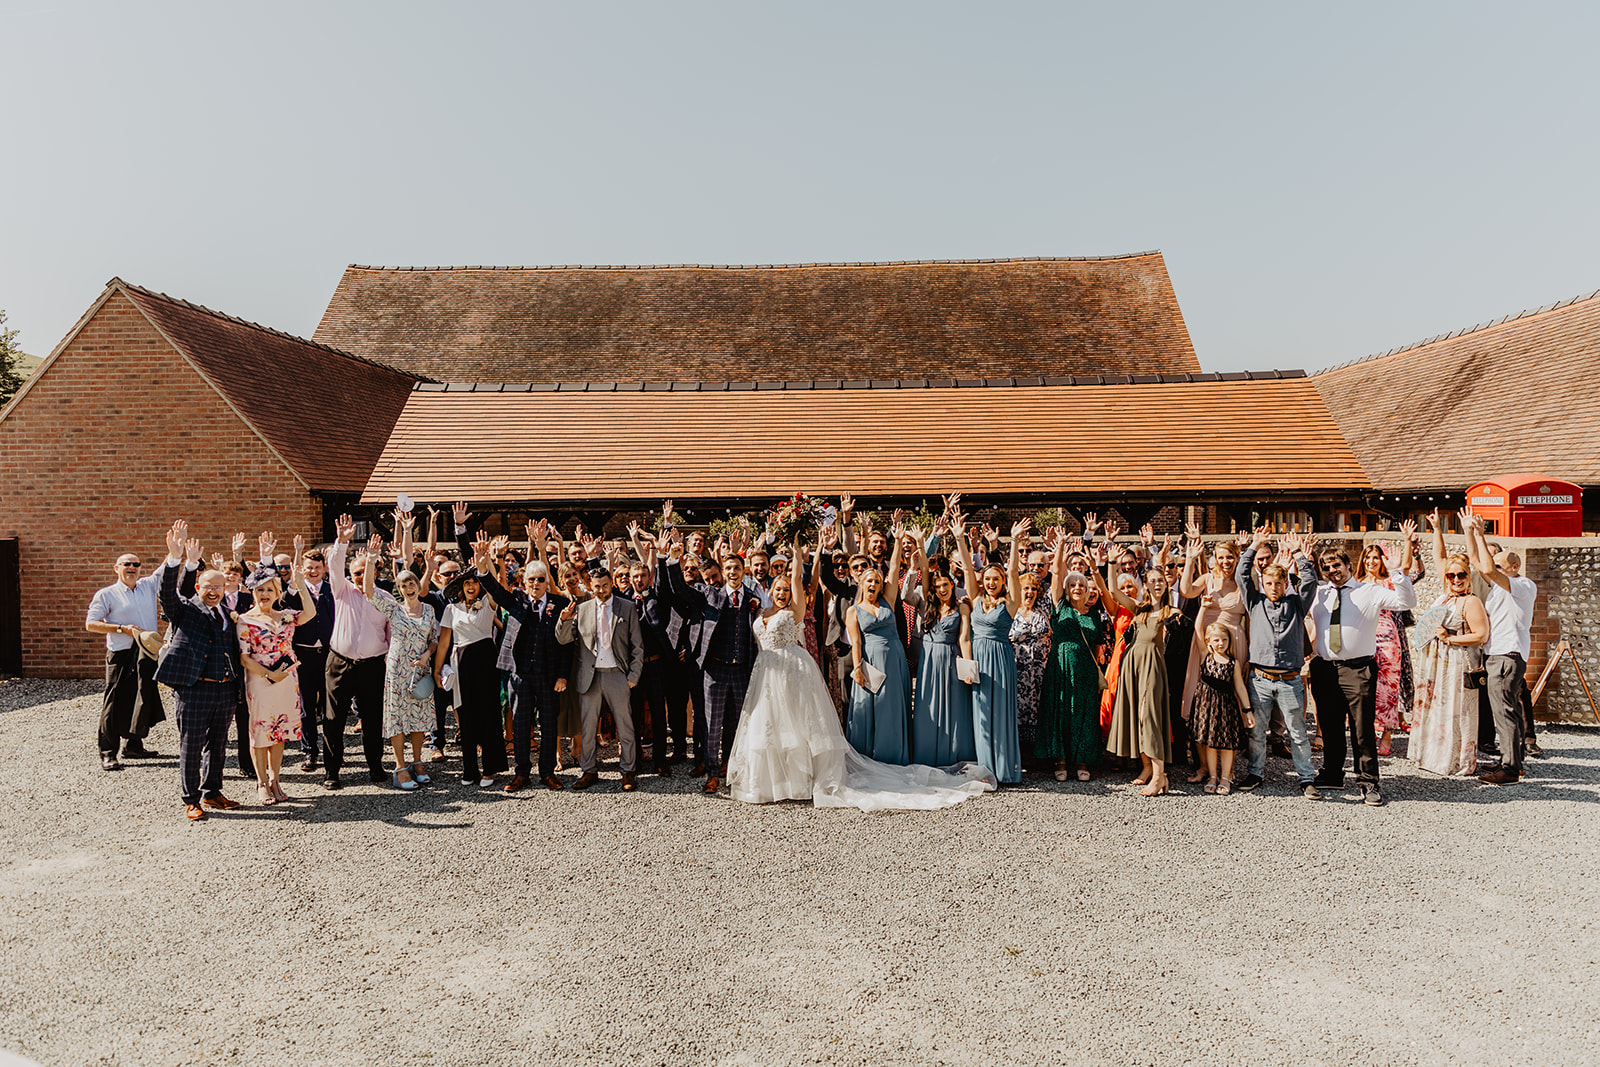 Wedding guests group photo at a wedding at Long Furlong Barn, Sussex. By OliveJoy Photography.